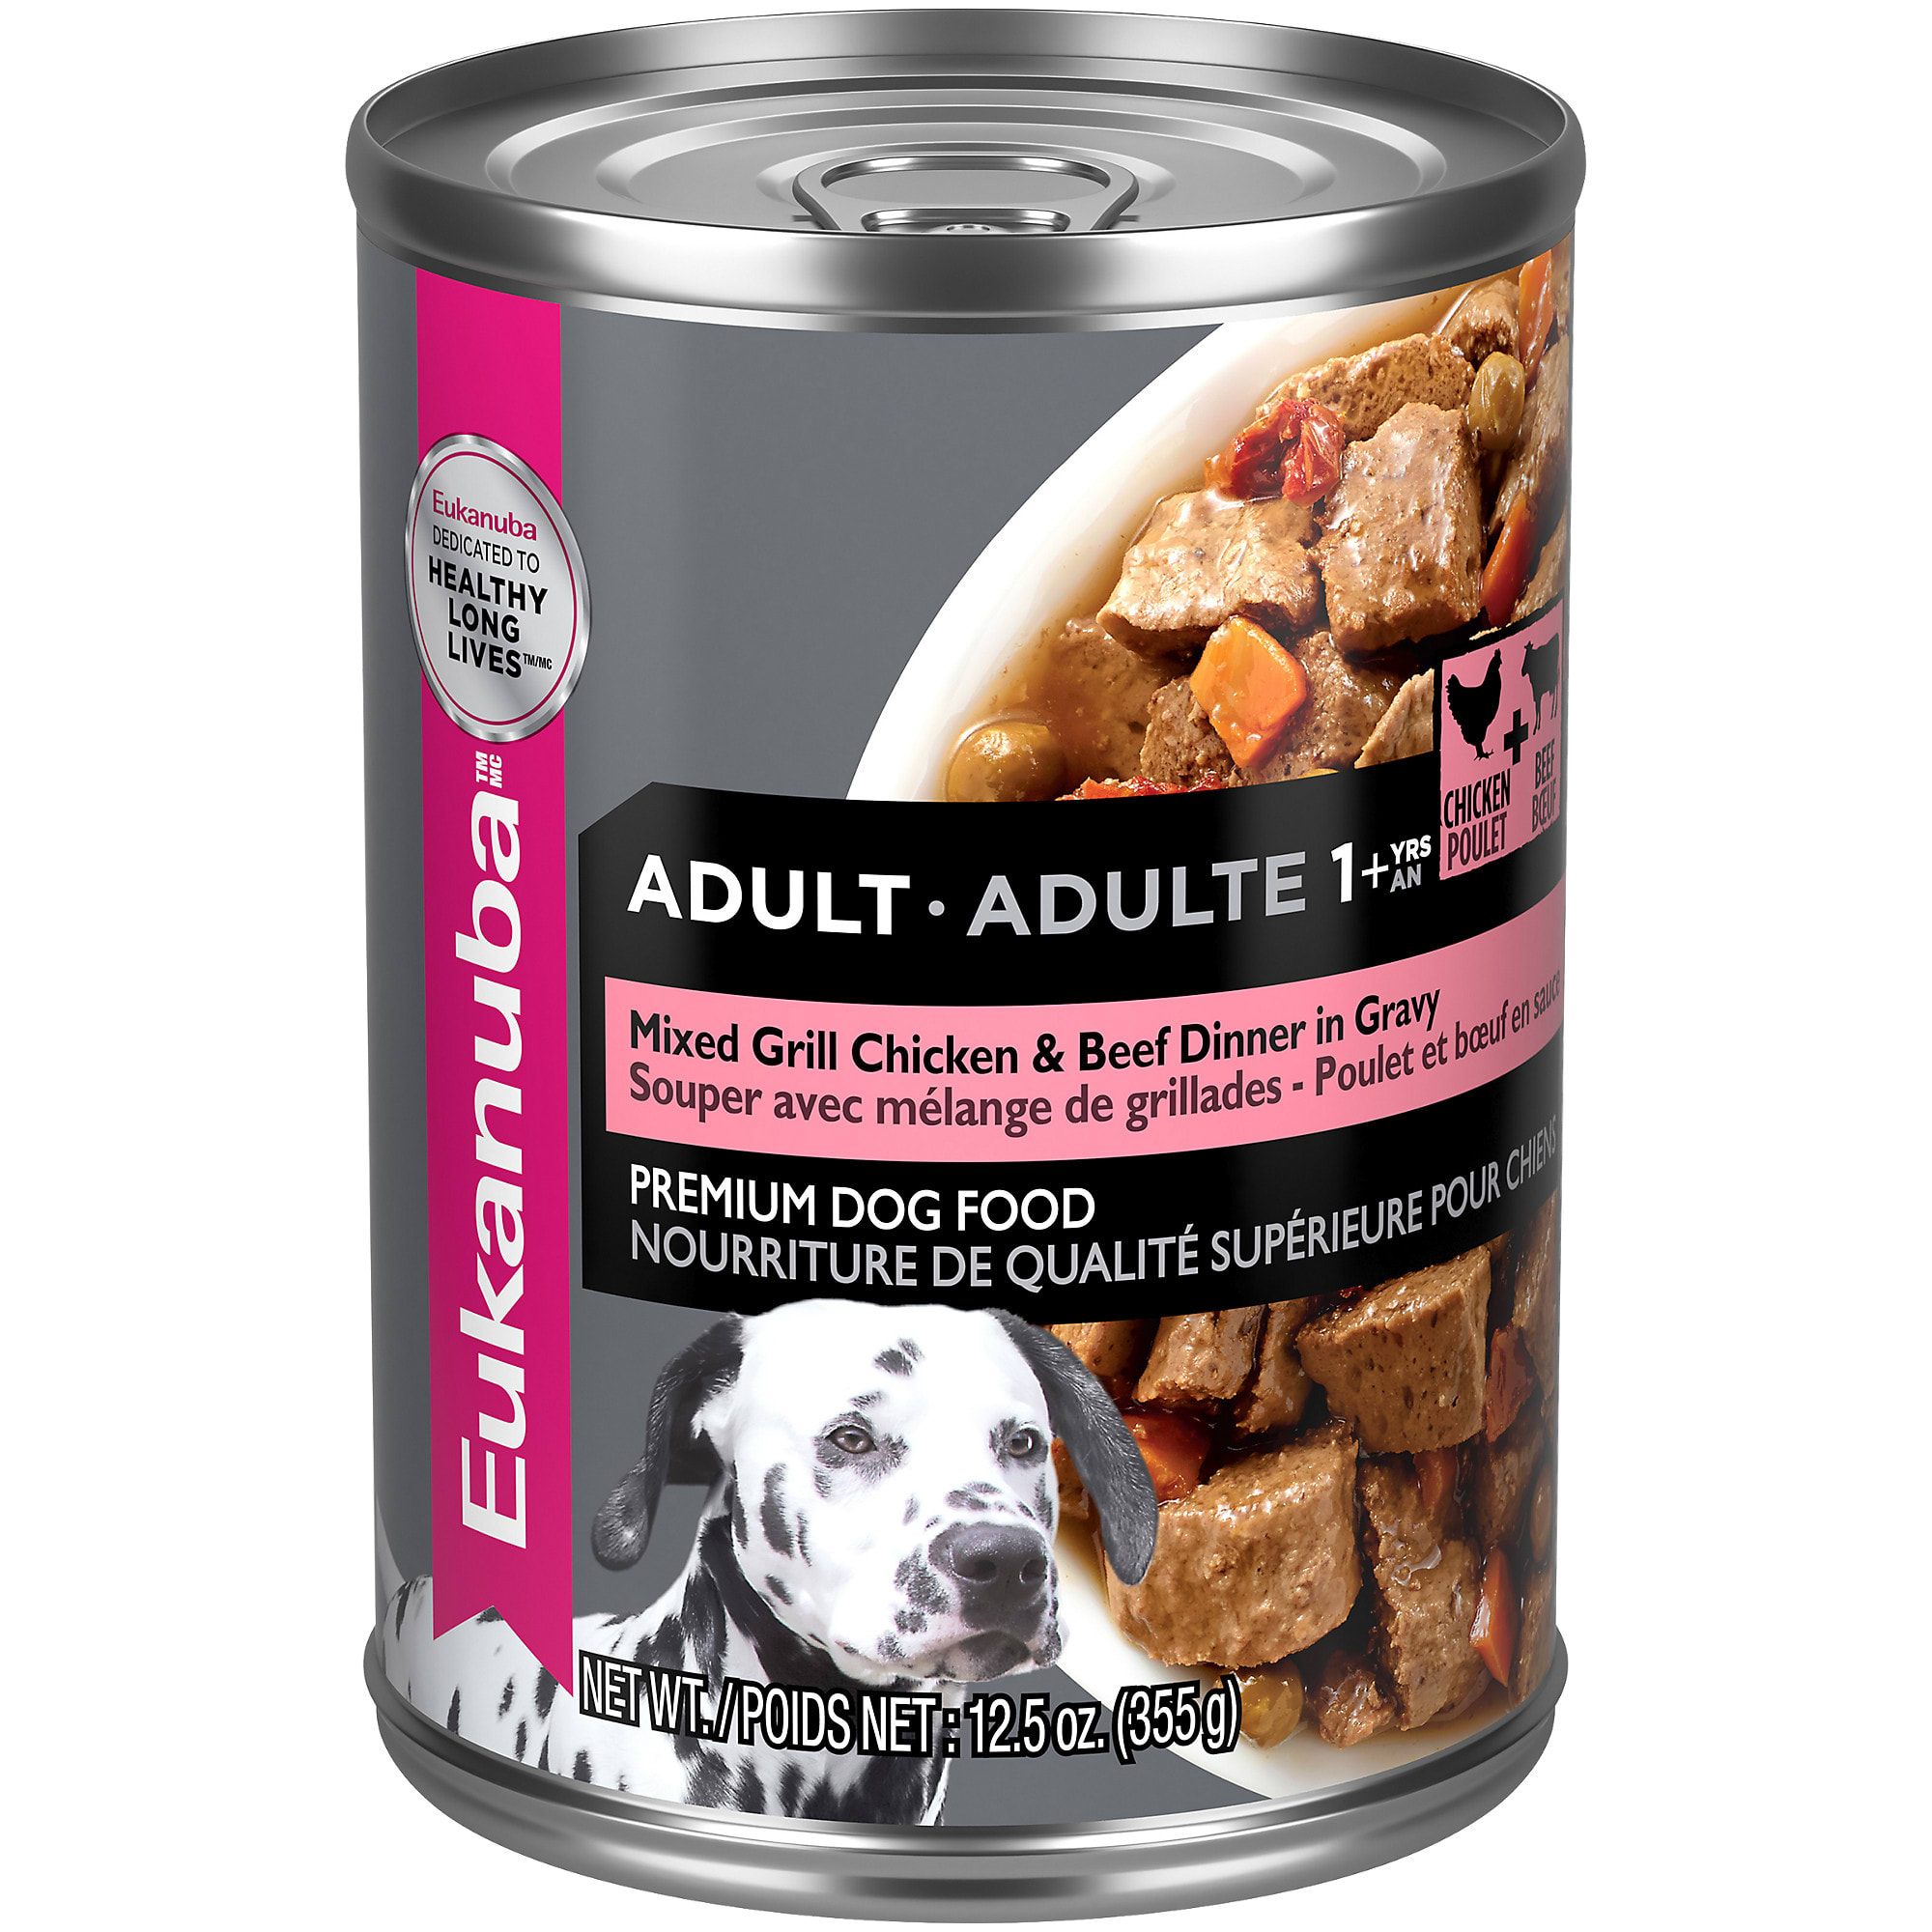 Photos - Dog Food Eukanuba Adult Mixed Grill Chicken & Beef Dinner in Gravy Canned 